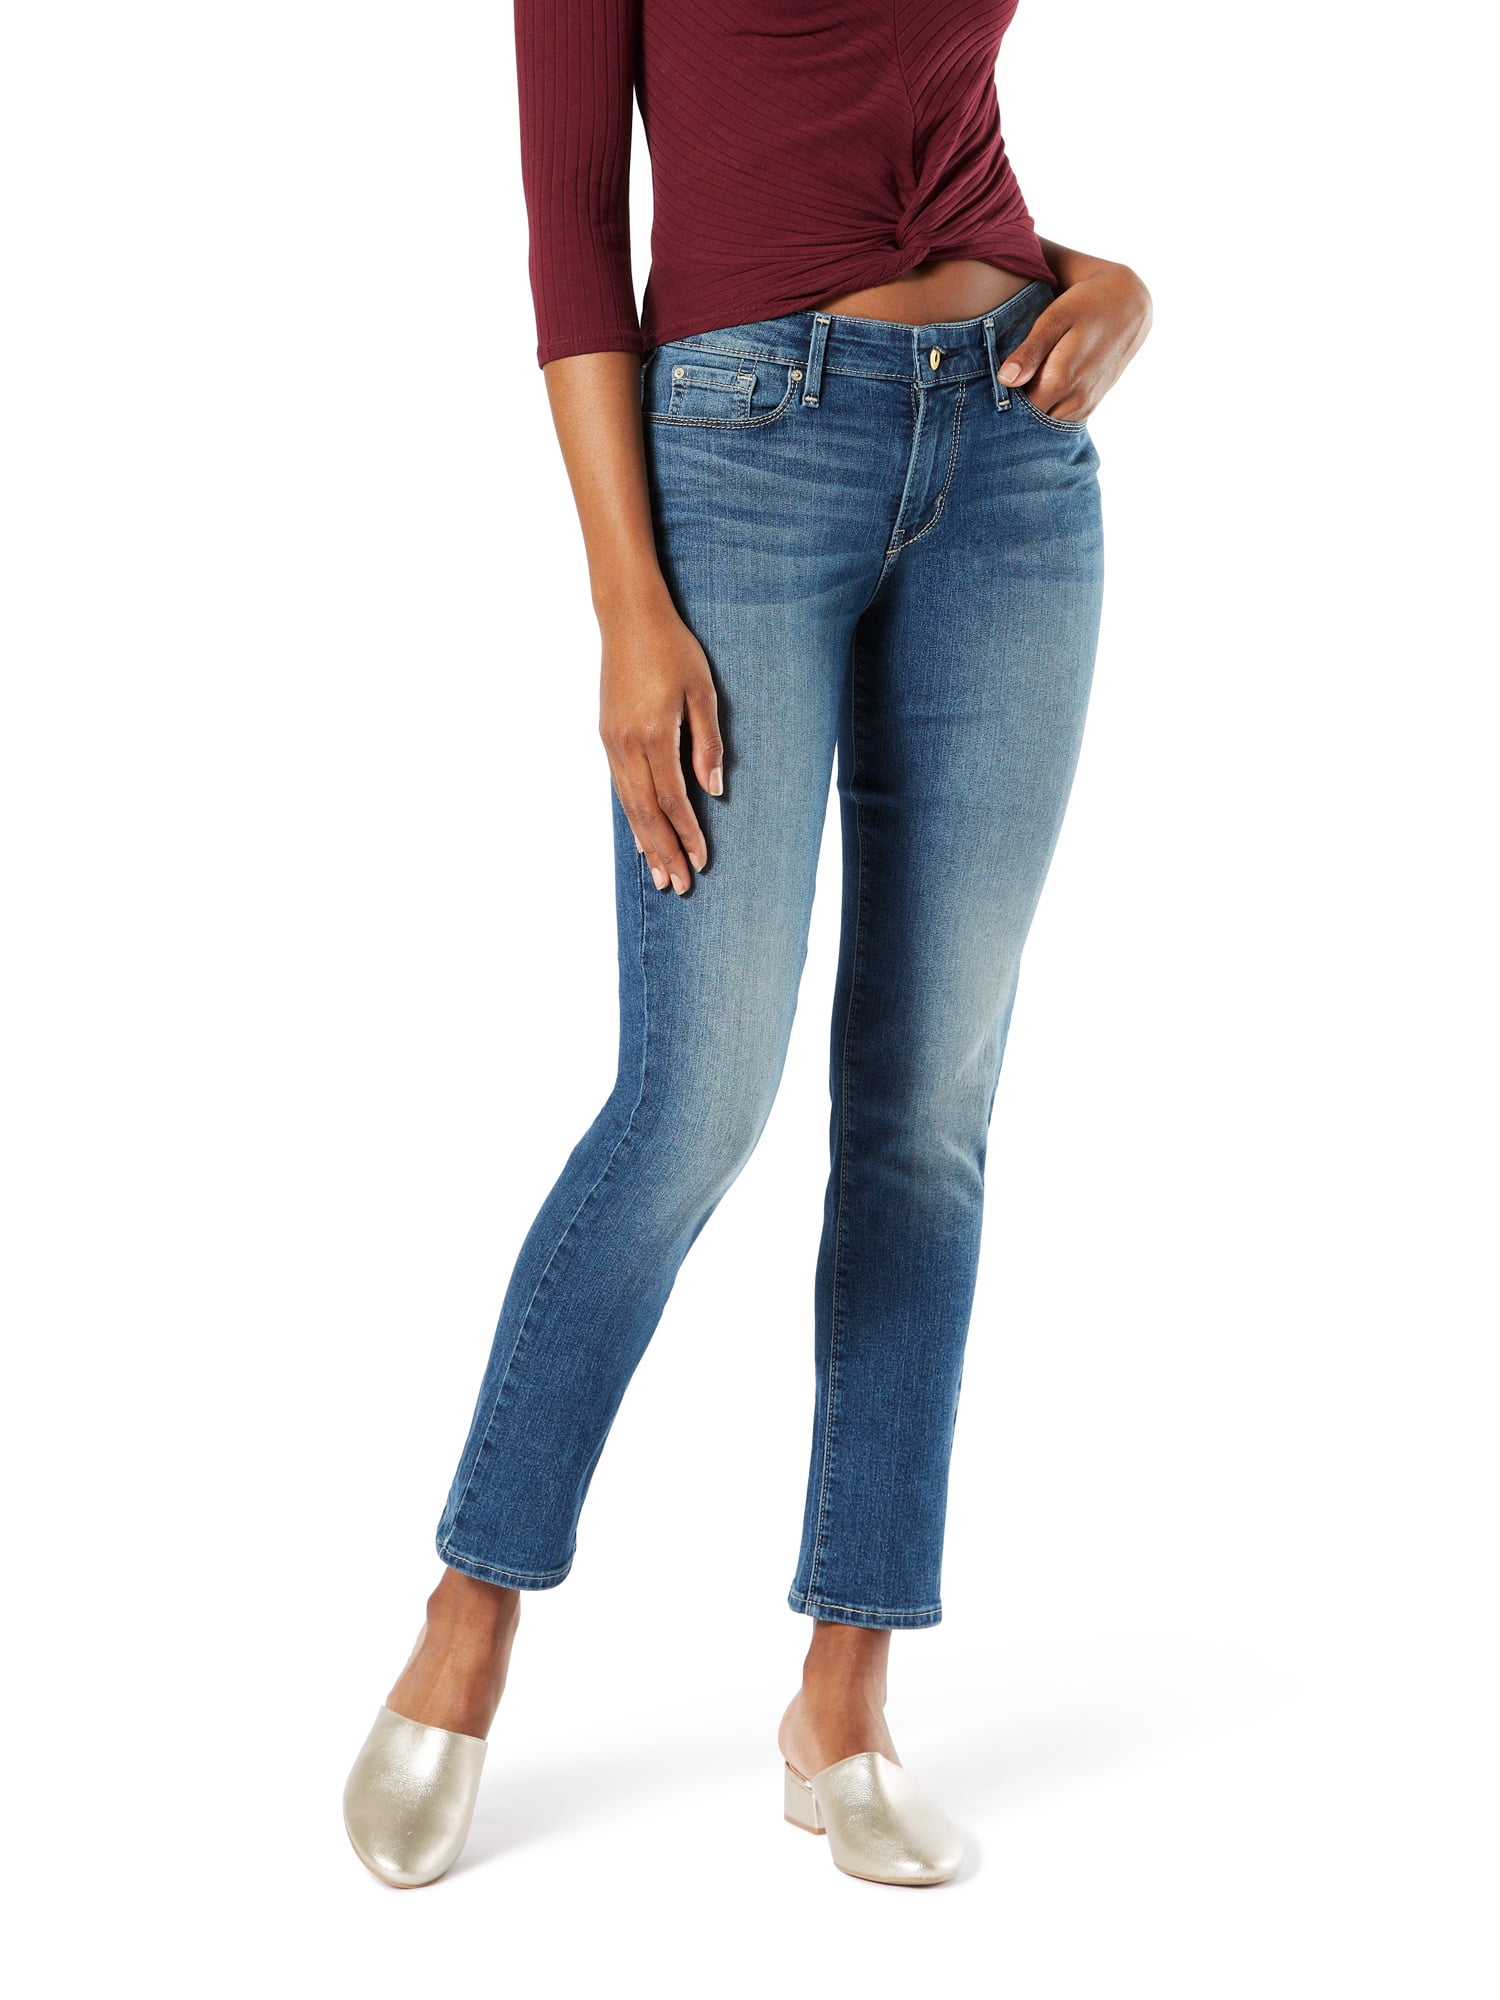 Signature by Levi Strauss & Co. Women's Modern Slim Jeans